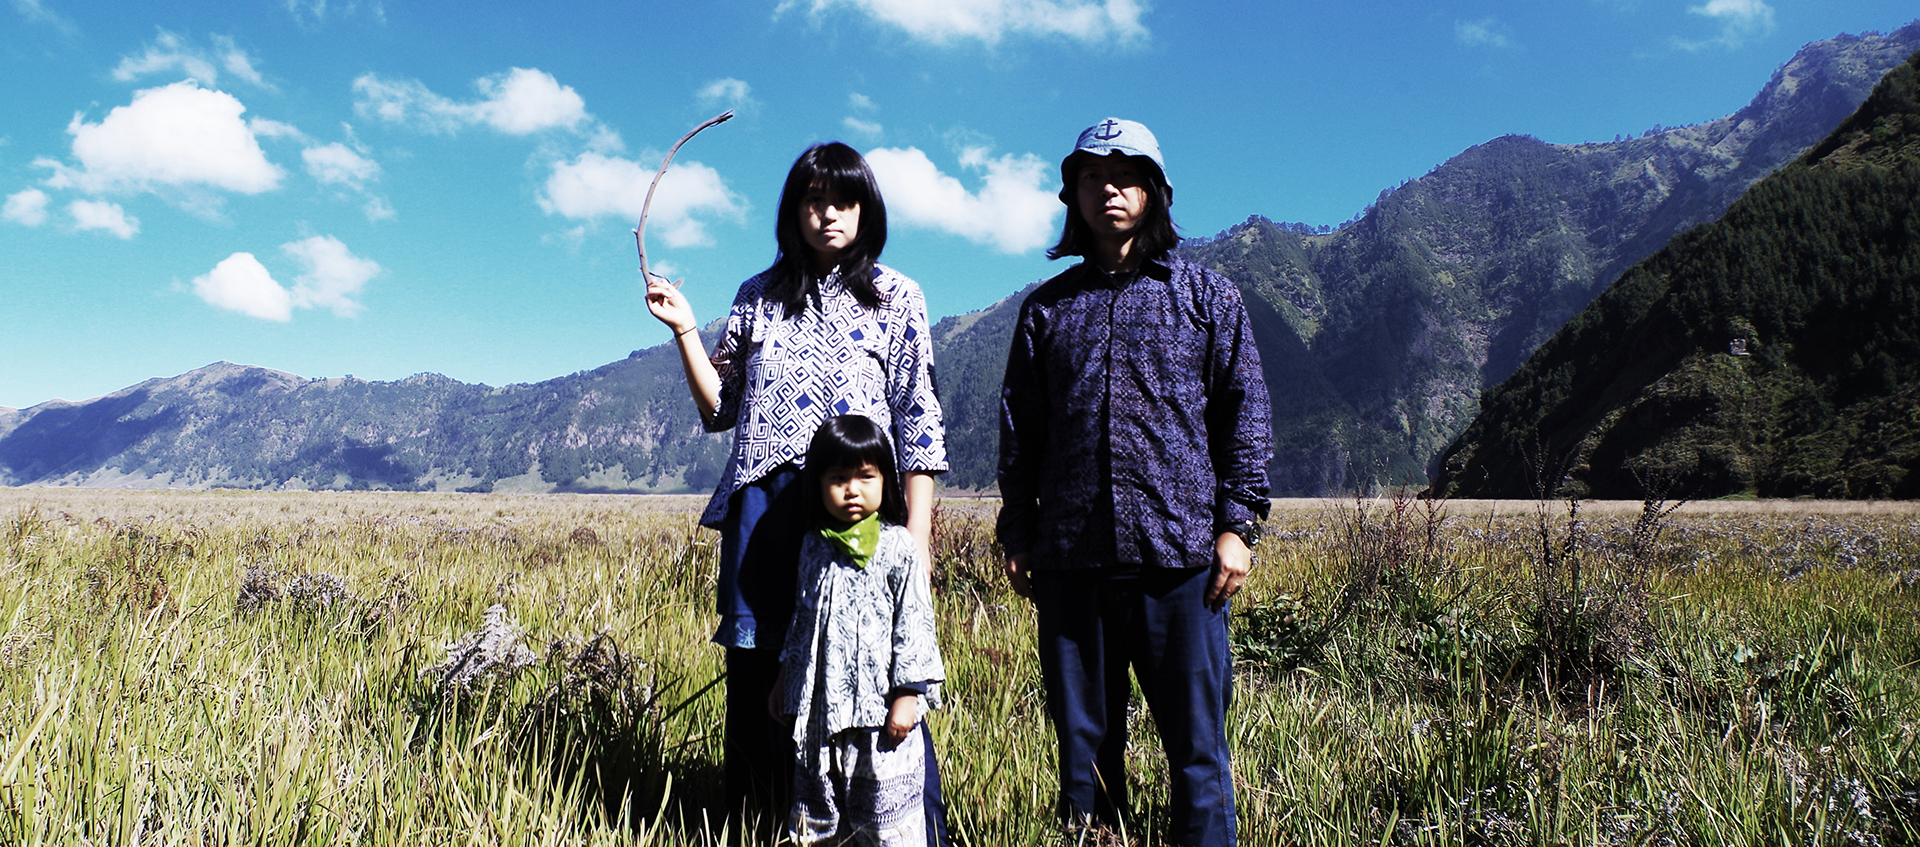 Band members itta and Marqido and their young child stand in a grassy field. There are mountains and a blue sky filled with clouds in the background.